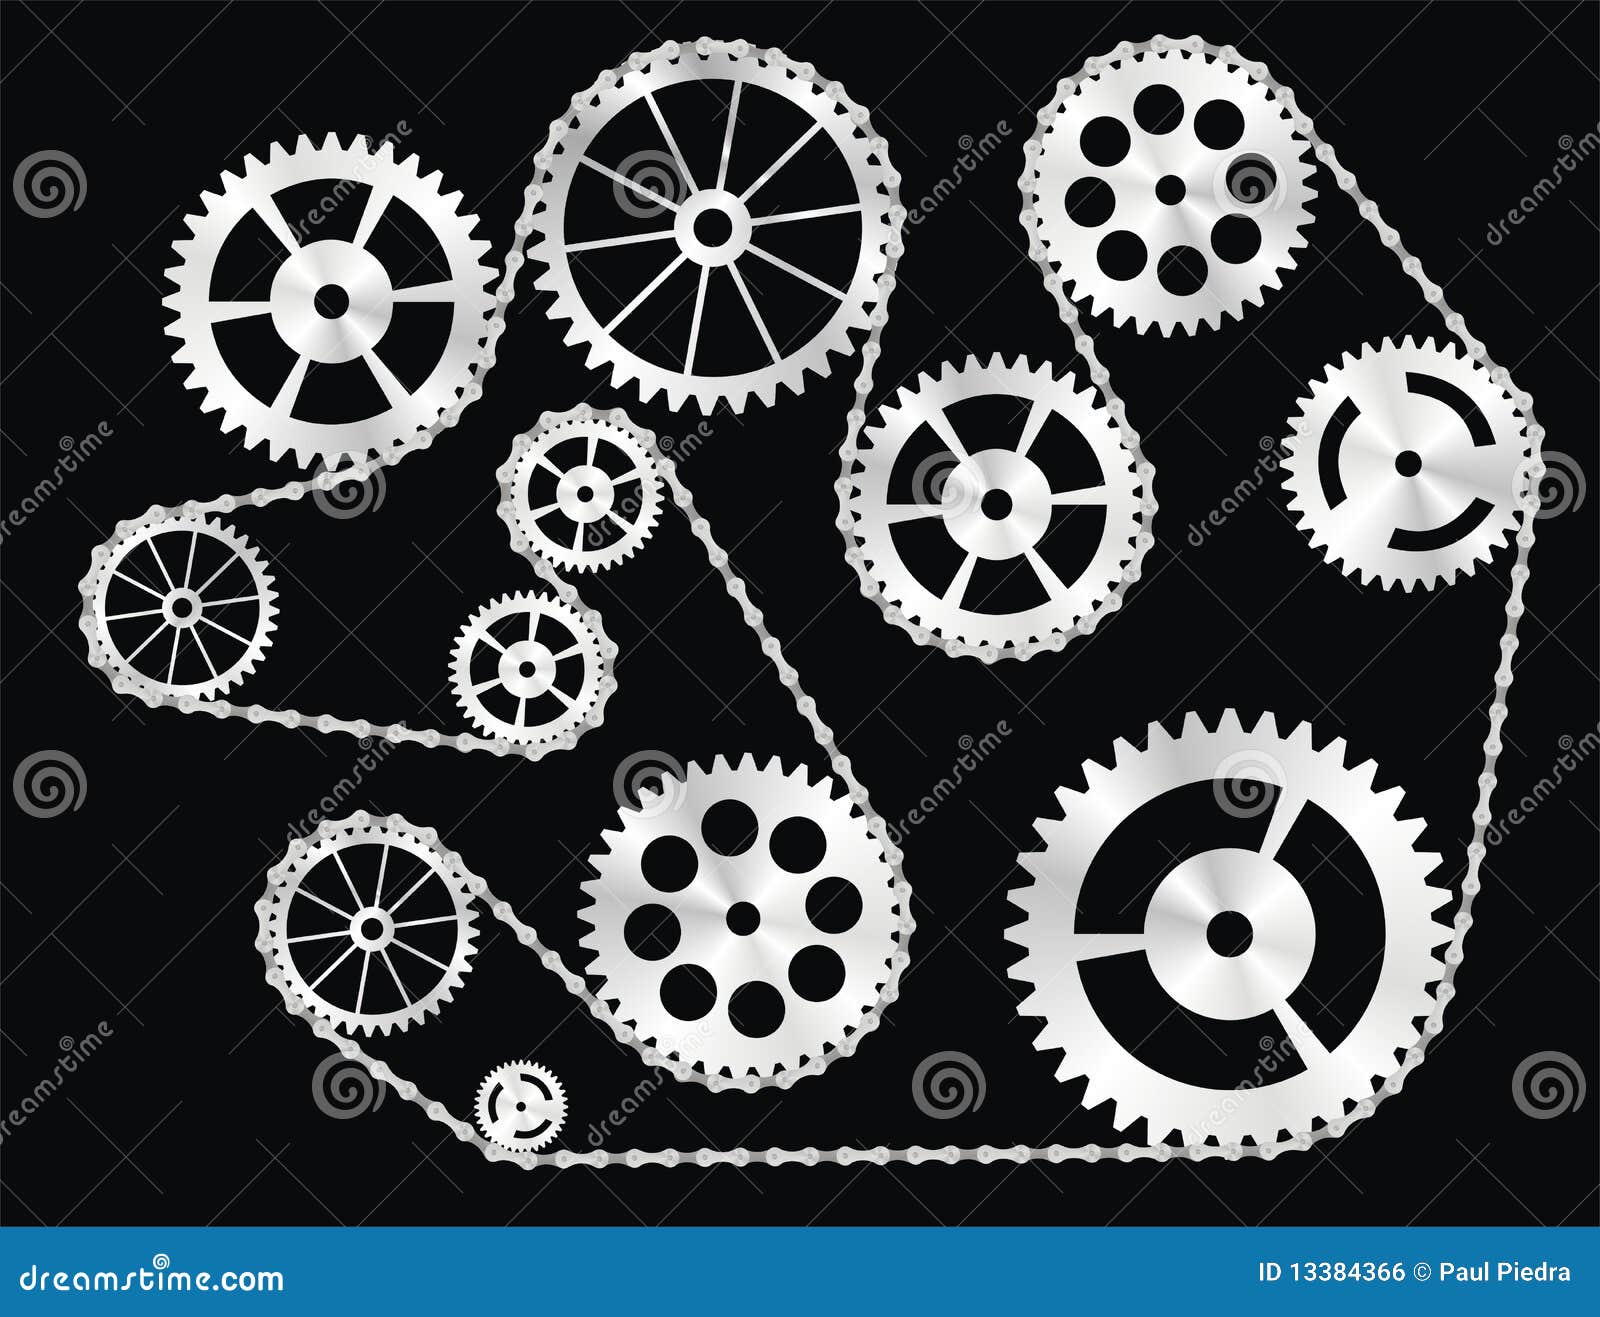 Gears Wrapped by a Chain stock vector. Image of background - 13384366